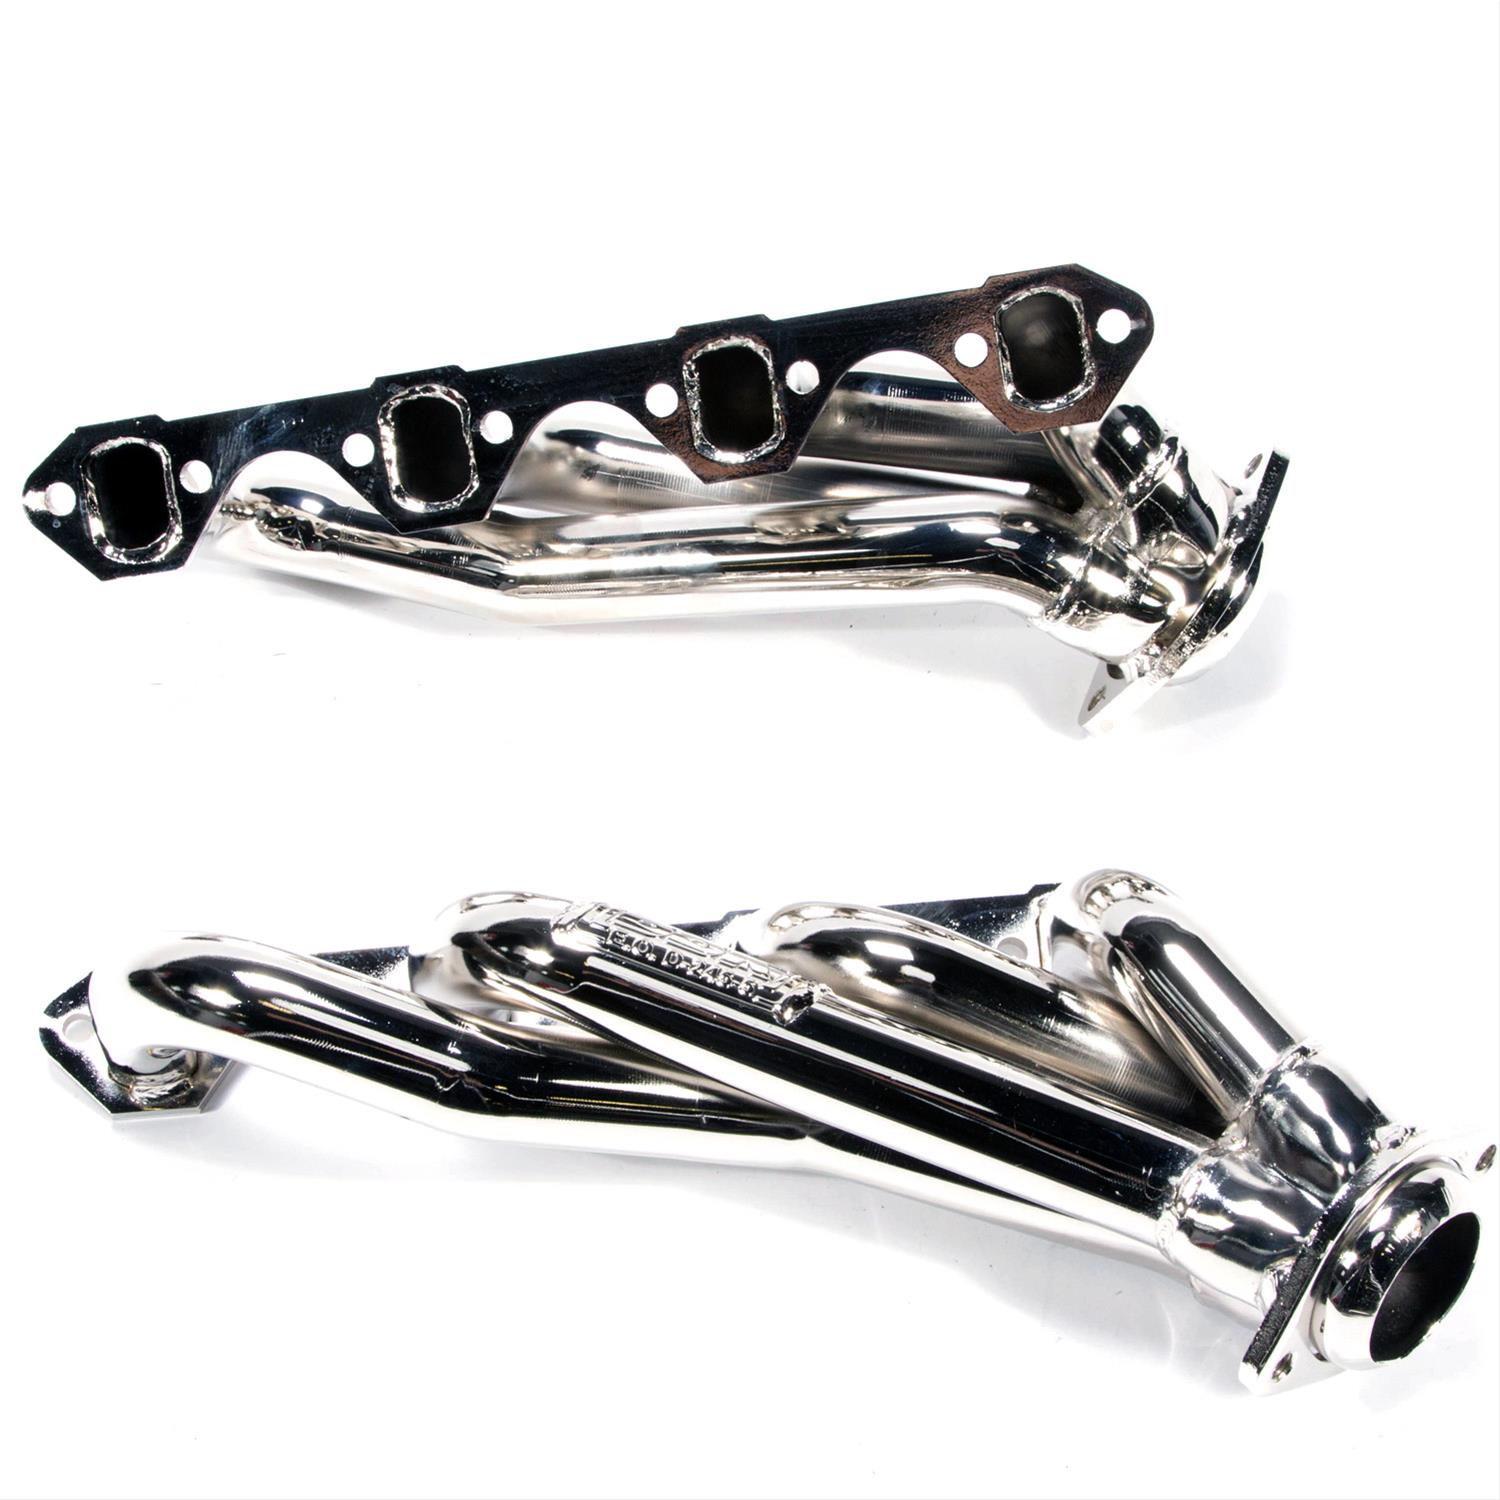 Ford 351w shorty headers #3